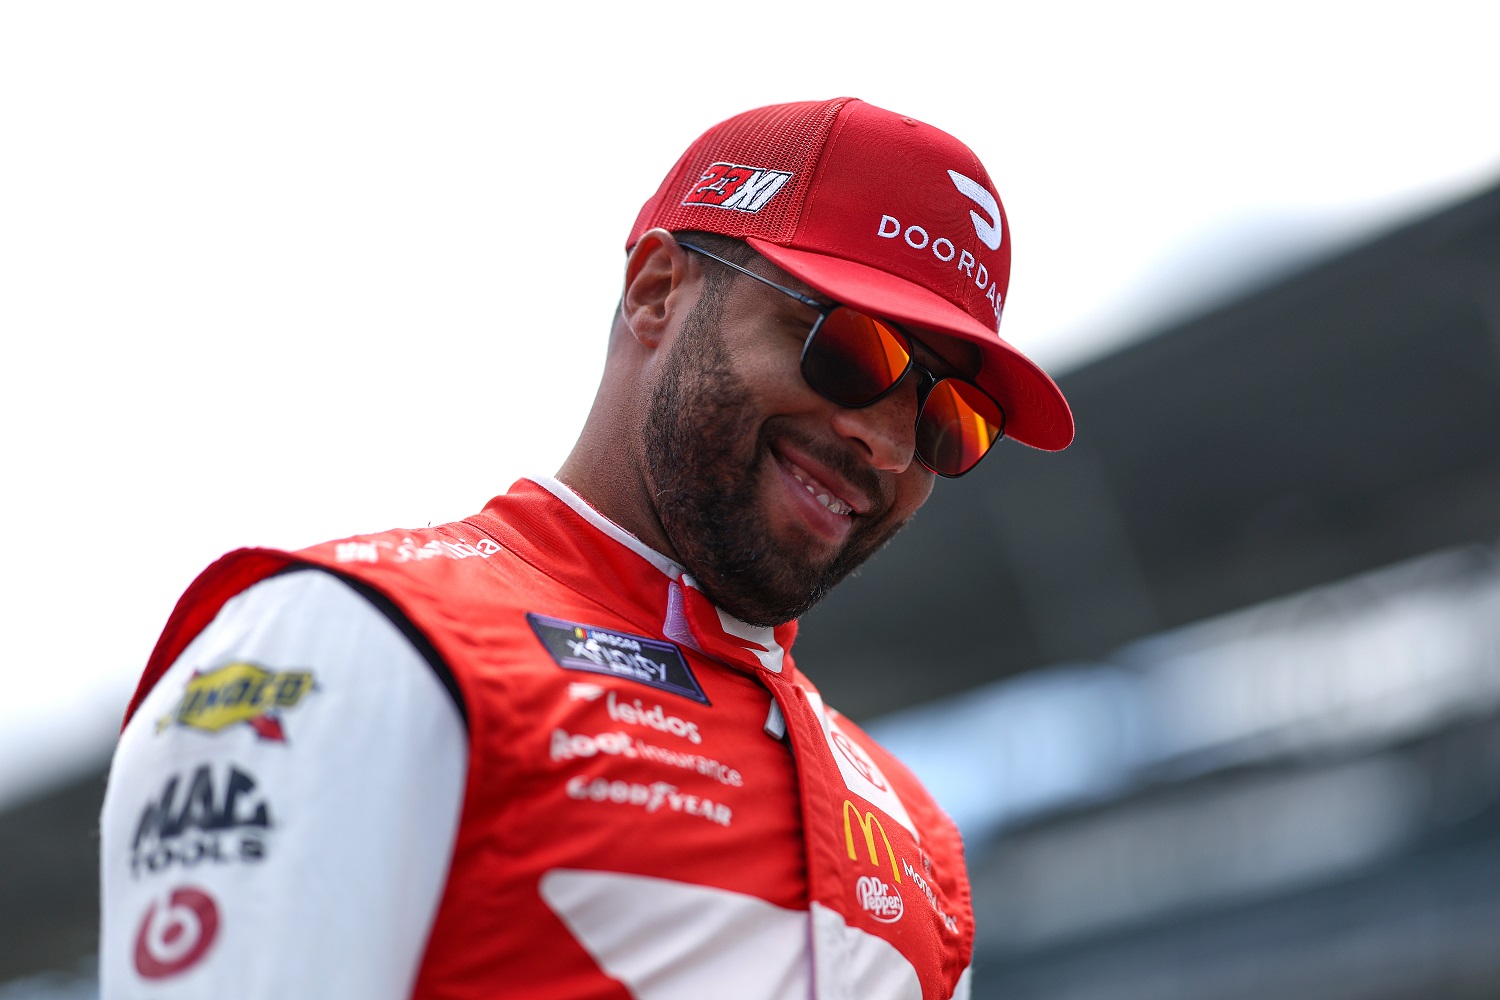 Bubba Wallace smiles on the grid during practice for the NASCAR Xfinity Series Pennzoil 150 at the Brickyard at Indianapolis Motor Speedway on July 29, 2022.